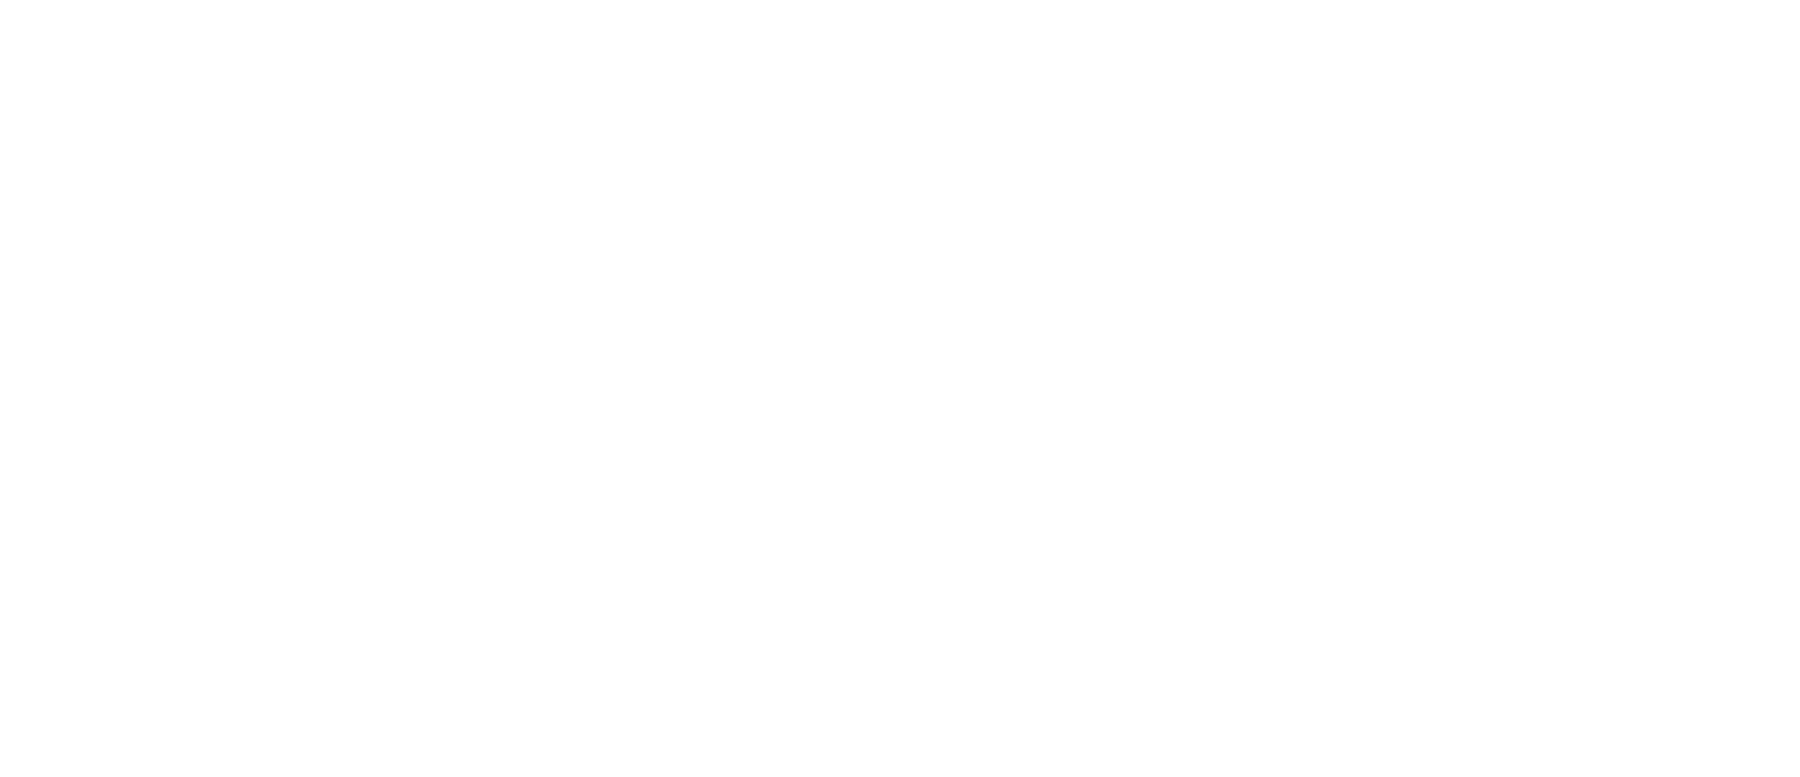 Built to Perfection typography